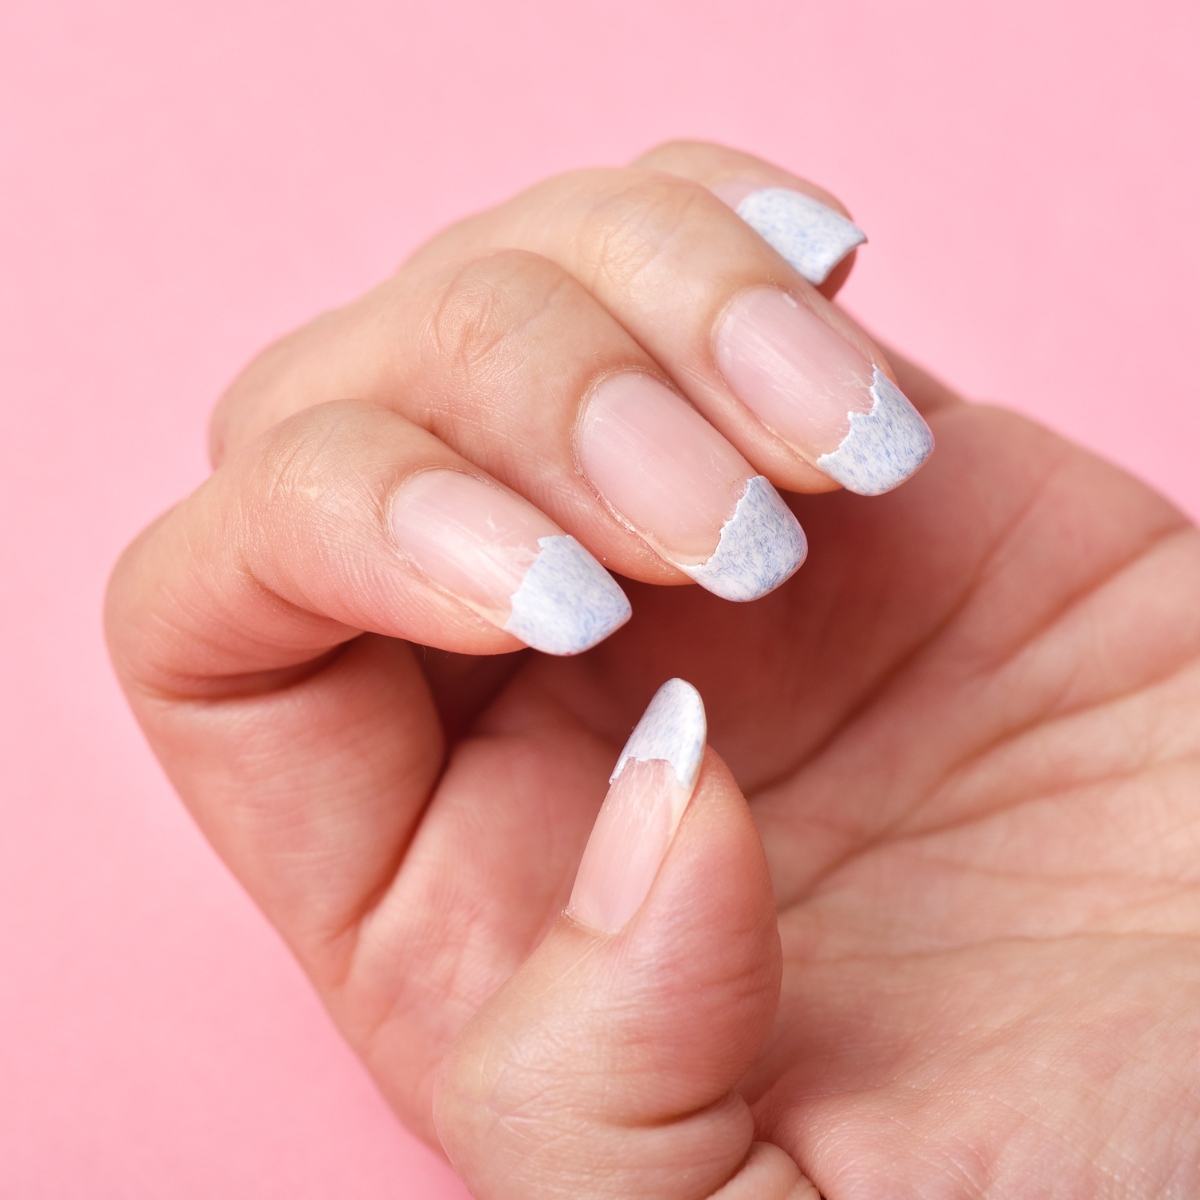 Why Do Gel Polishes Chip? Nail Technician Tips for Long-Lasting Manicures